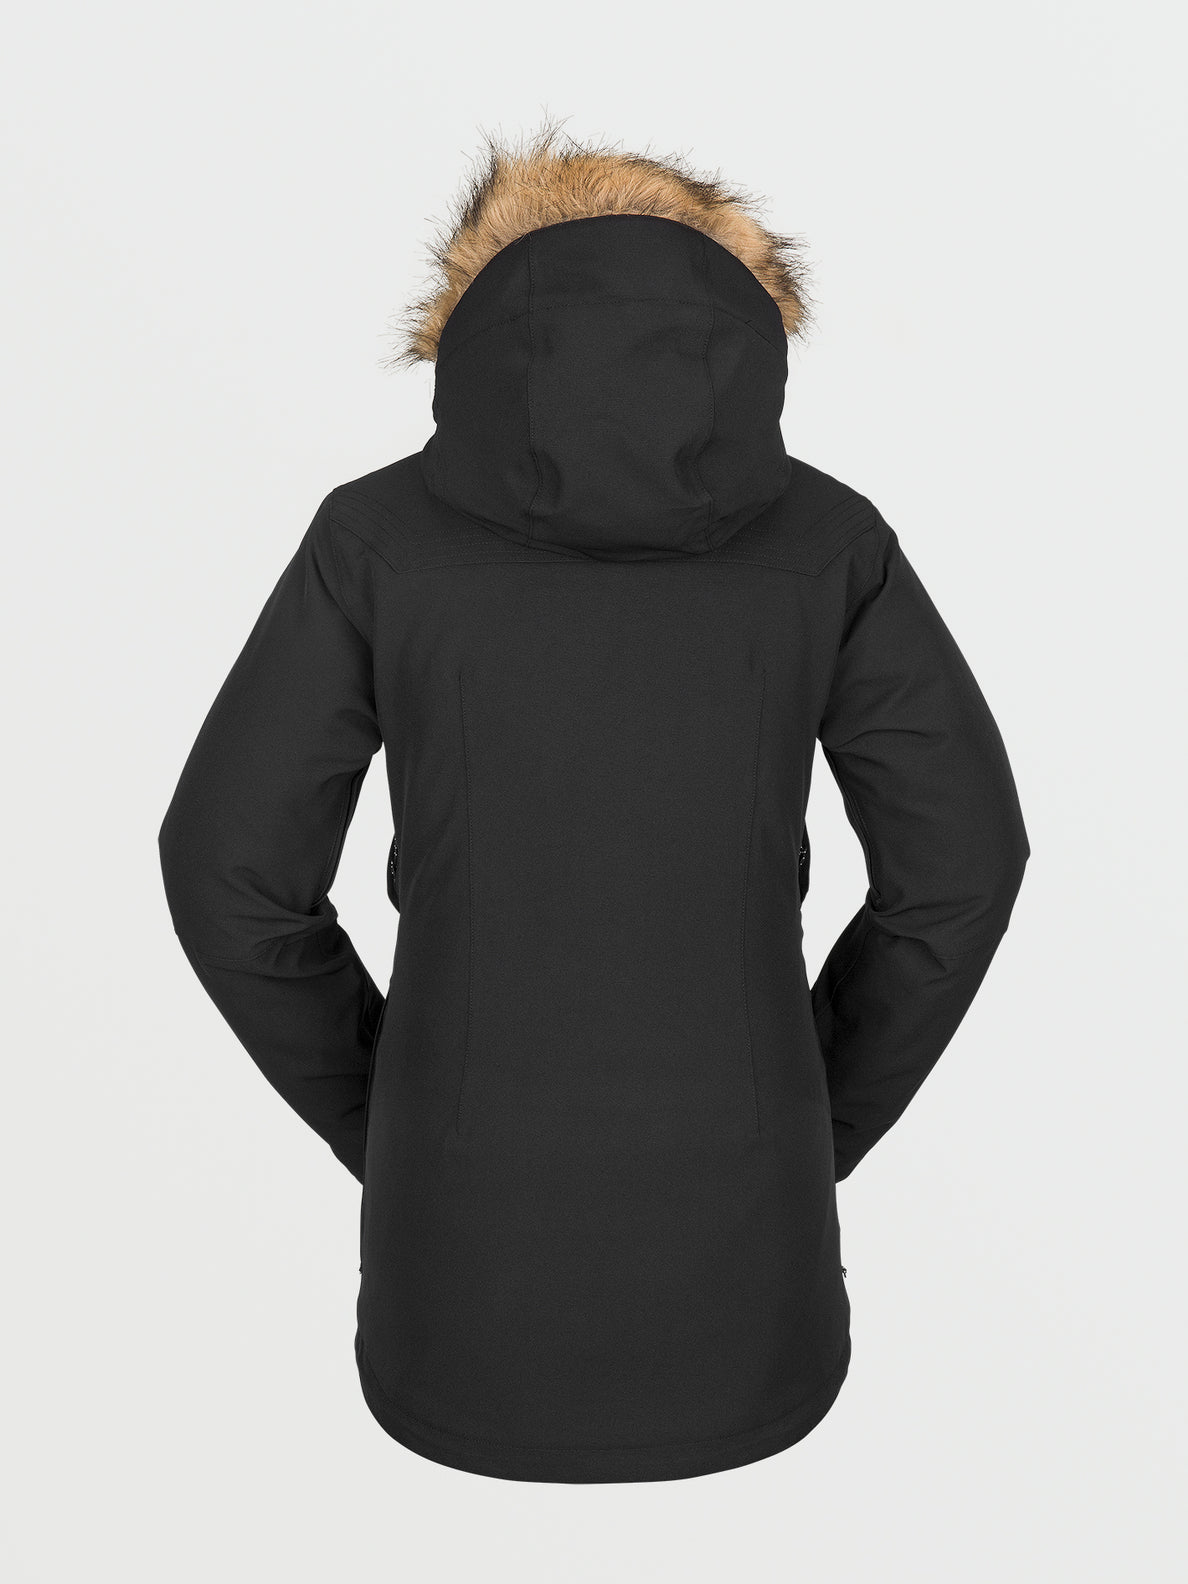 Womens Shadow Insulated Jacket - Black (H0452306_BLK) [12]